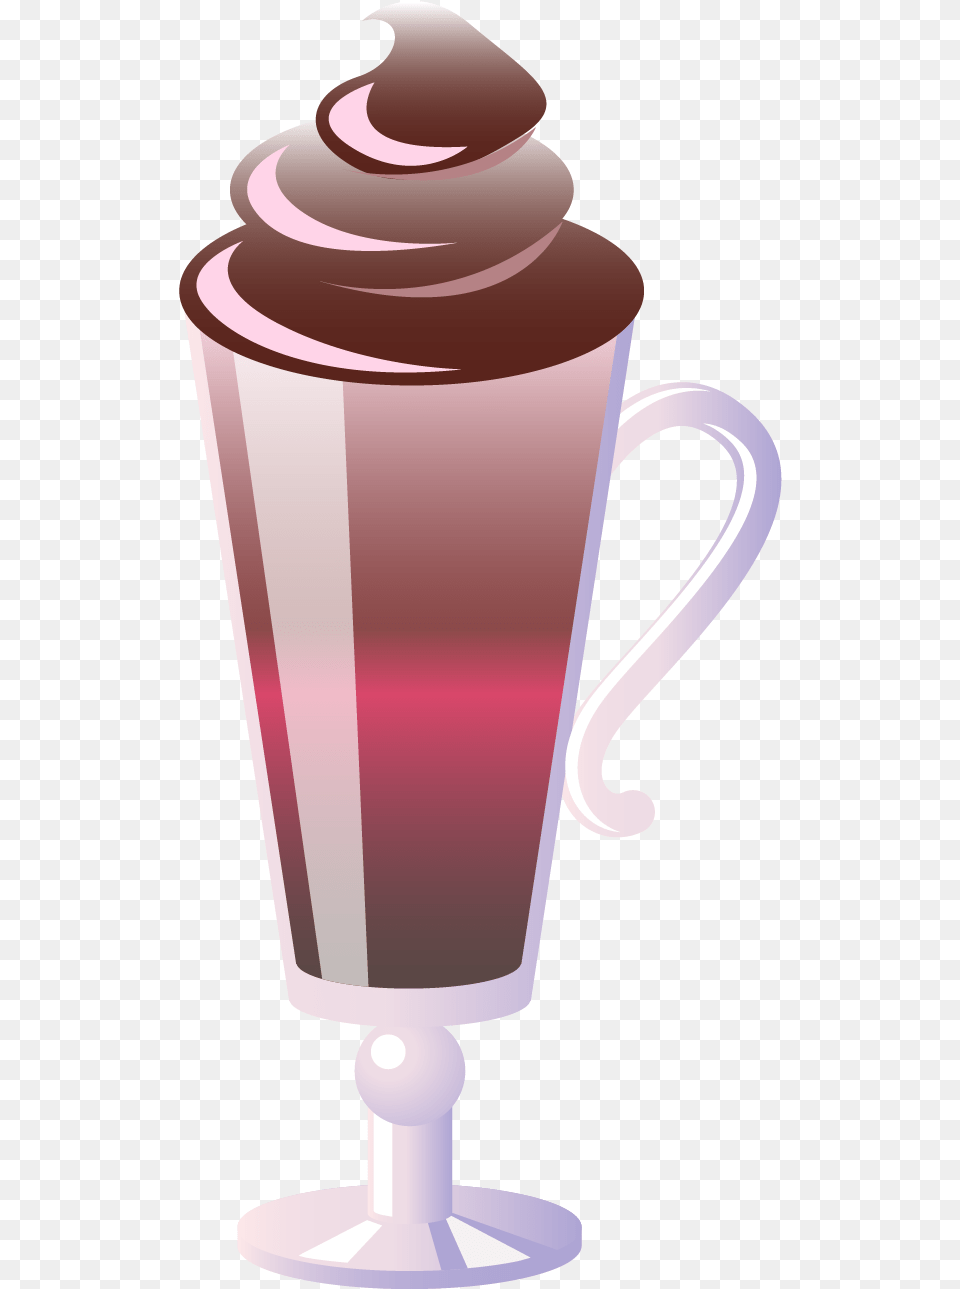 Strawberry Ice Cream Icon Vector, Bottle, Shaker, Jar Free Transparent Png